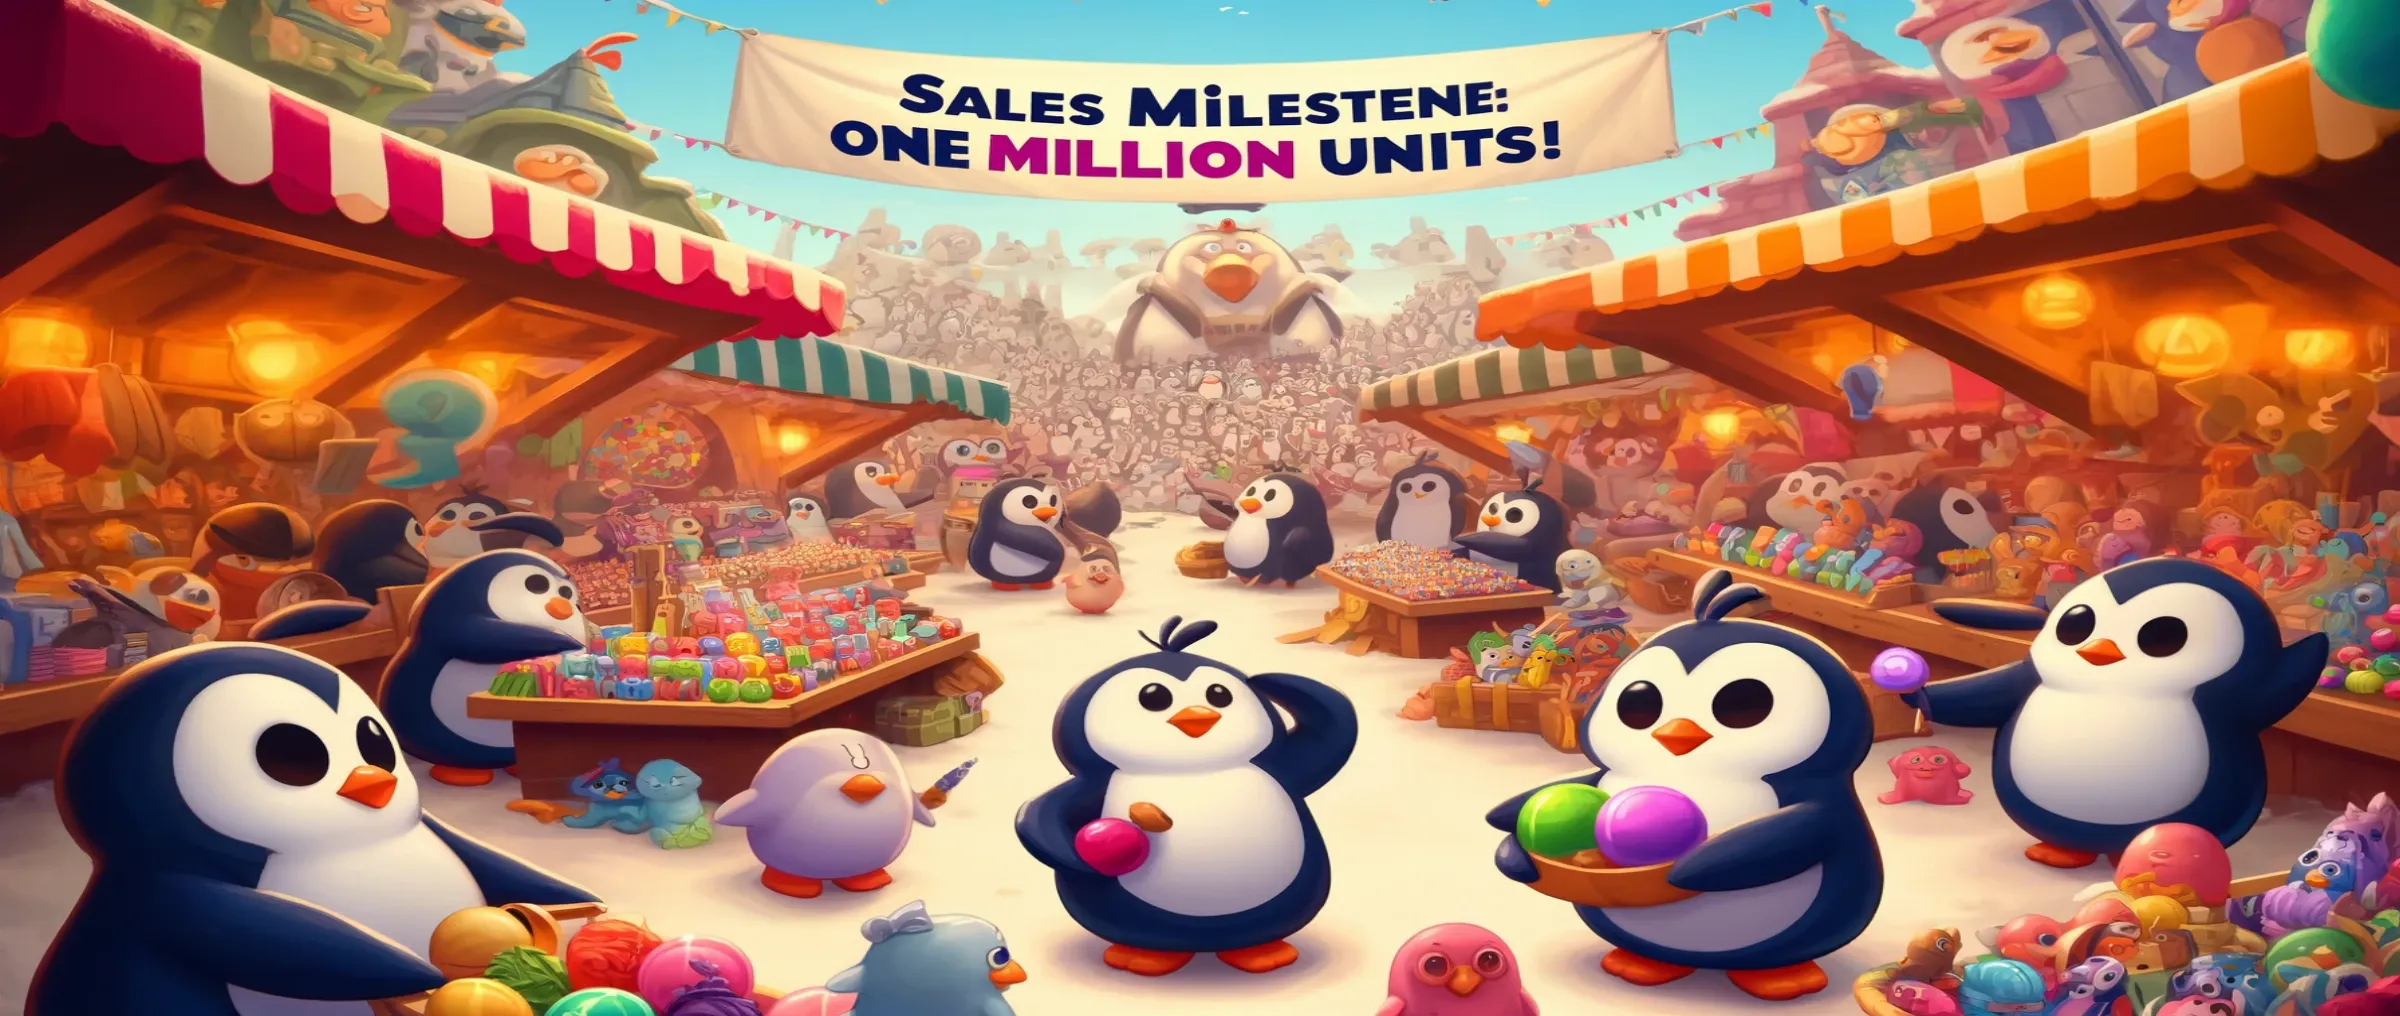 The sales of Pudgy Penguins toys, based on NFTs, have reached one million units